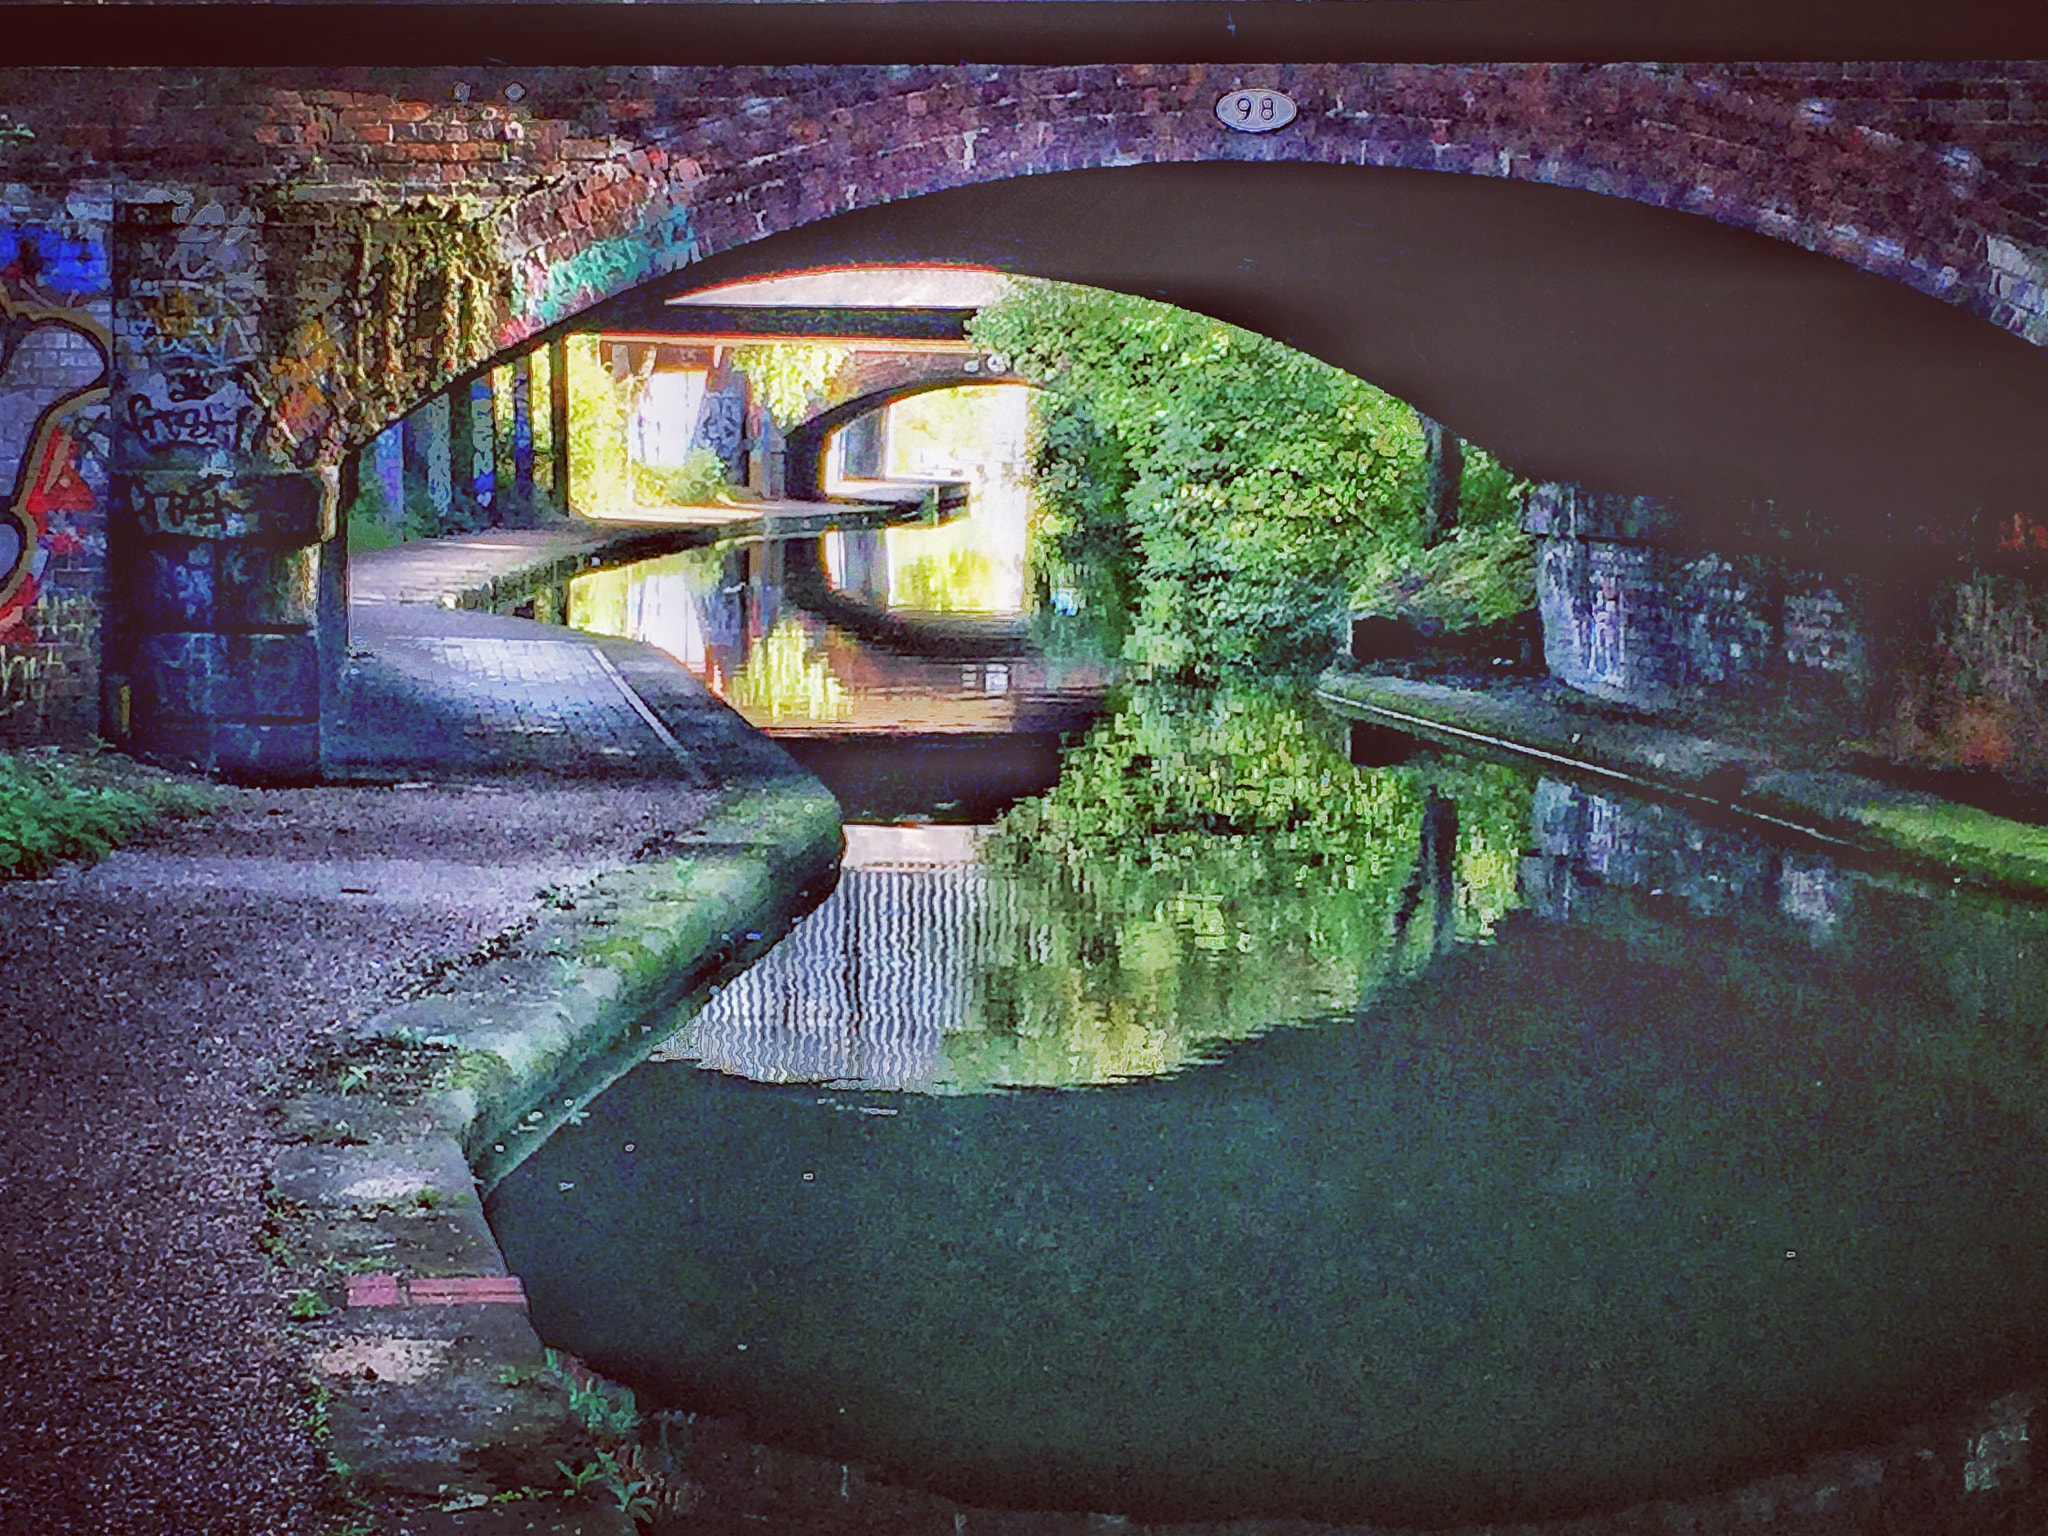 Jag.gr 645 PRO Mk III for Apple iPhone 6 sample photo. Grand union canal birmingham on an early morning bike ride photography